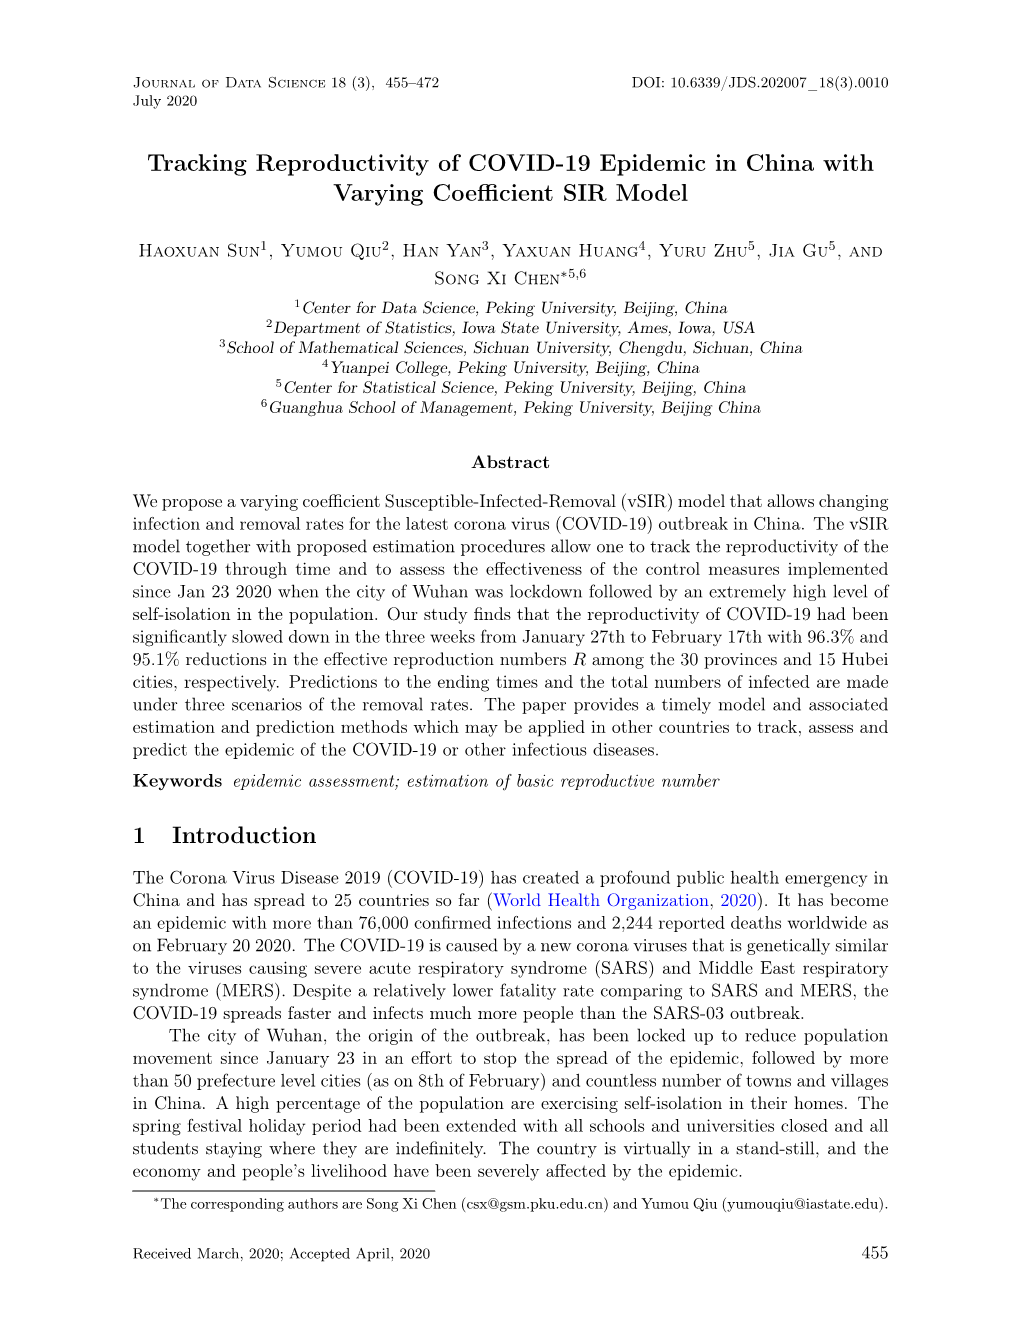 Tracking Reproductivity of COVID-19 Epidemic in China with Varying Coeﬃcient SIR Model